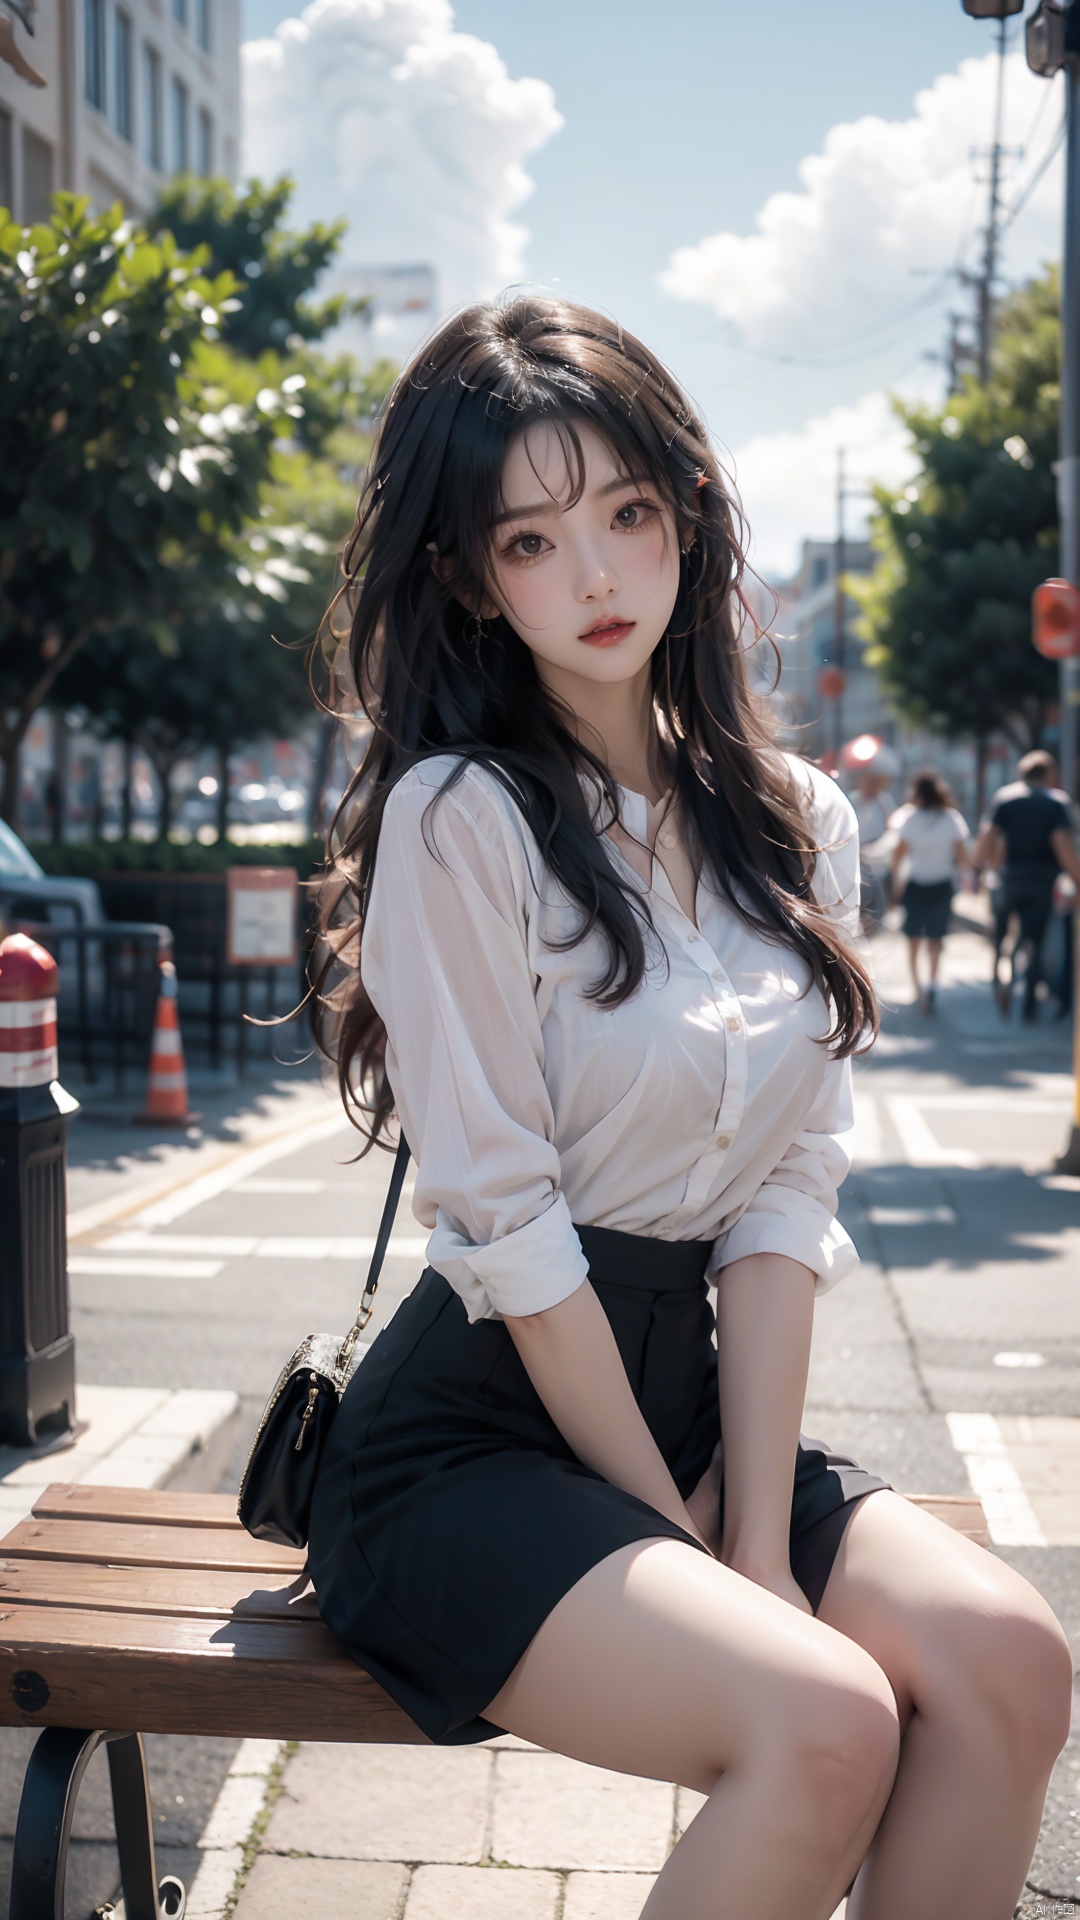  A woman sitting on a park bench with sky and clouds in the background, wearing a white blouse, Du Qiong, girl, a painting, aestheticism
, tutututu, Nebula, bj_Devil_angel